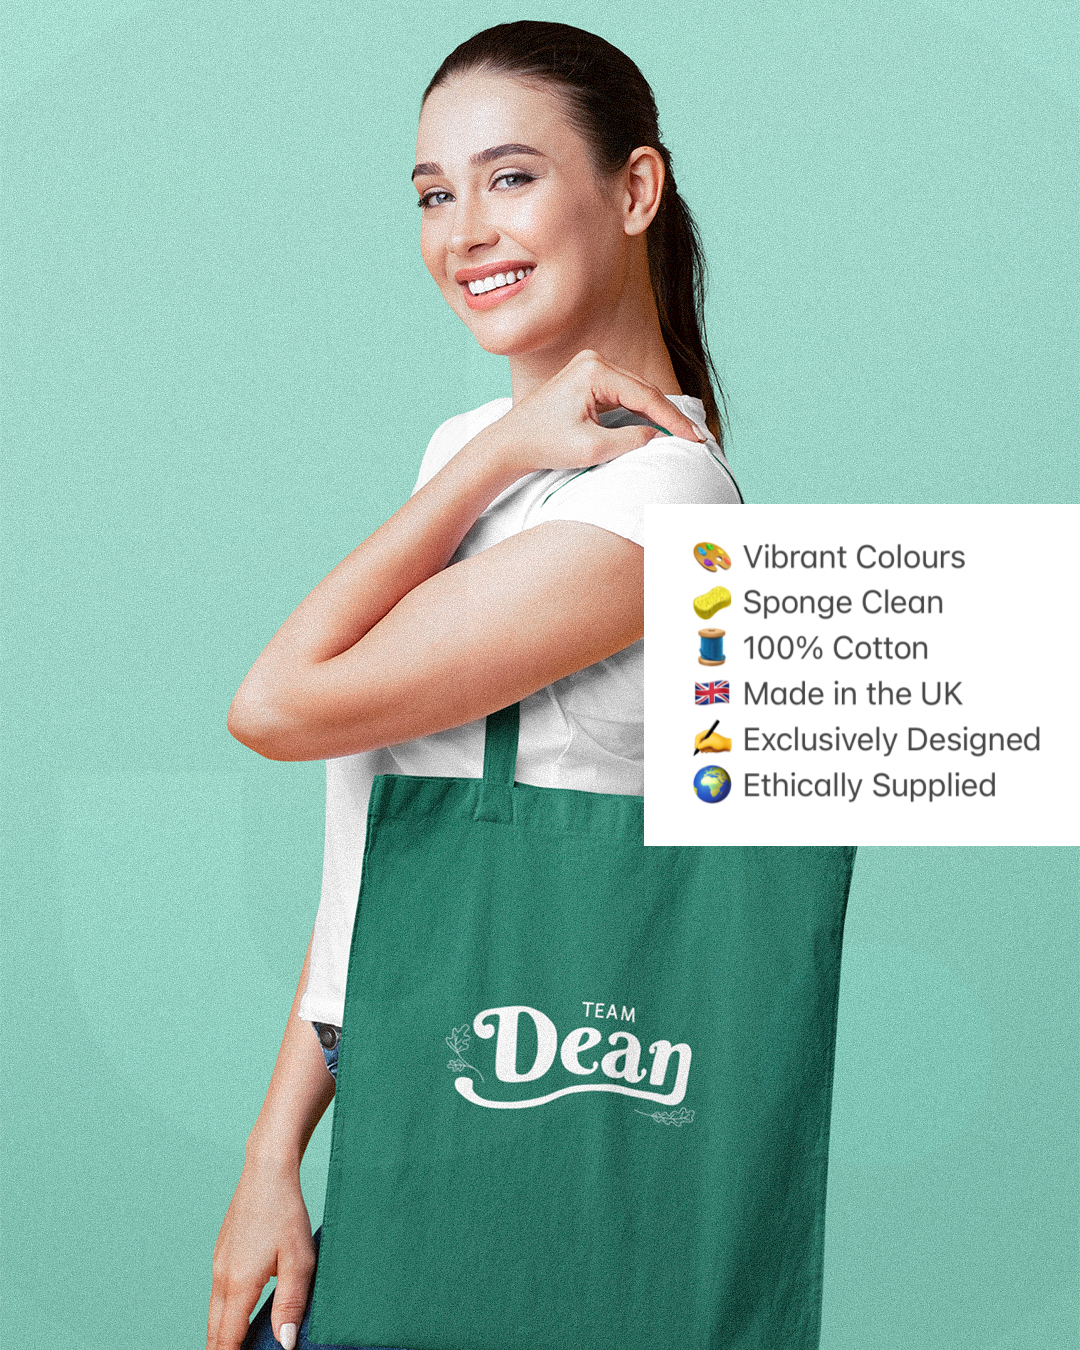 Team Dean Forester Tote Bag - Gilmore Girls Inspired Tote Bag - Rory Gilmore's Boyfriends - Team Dean Forester Gilmore Girls Inspired Tote Bag